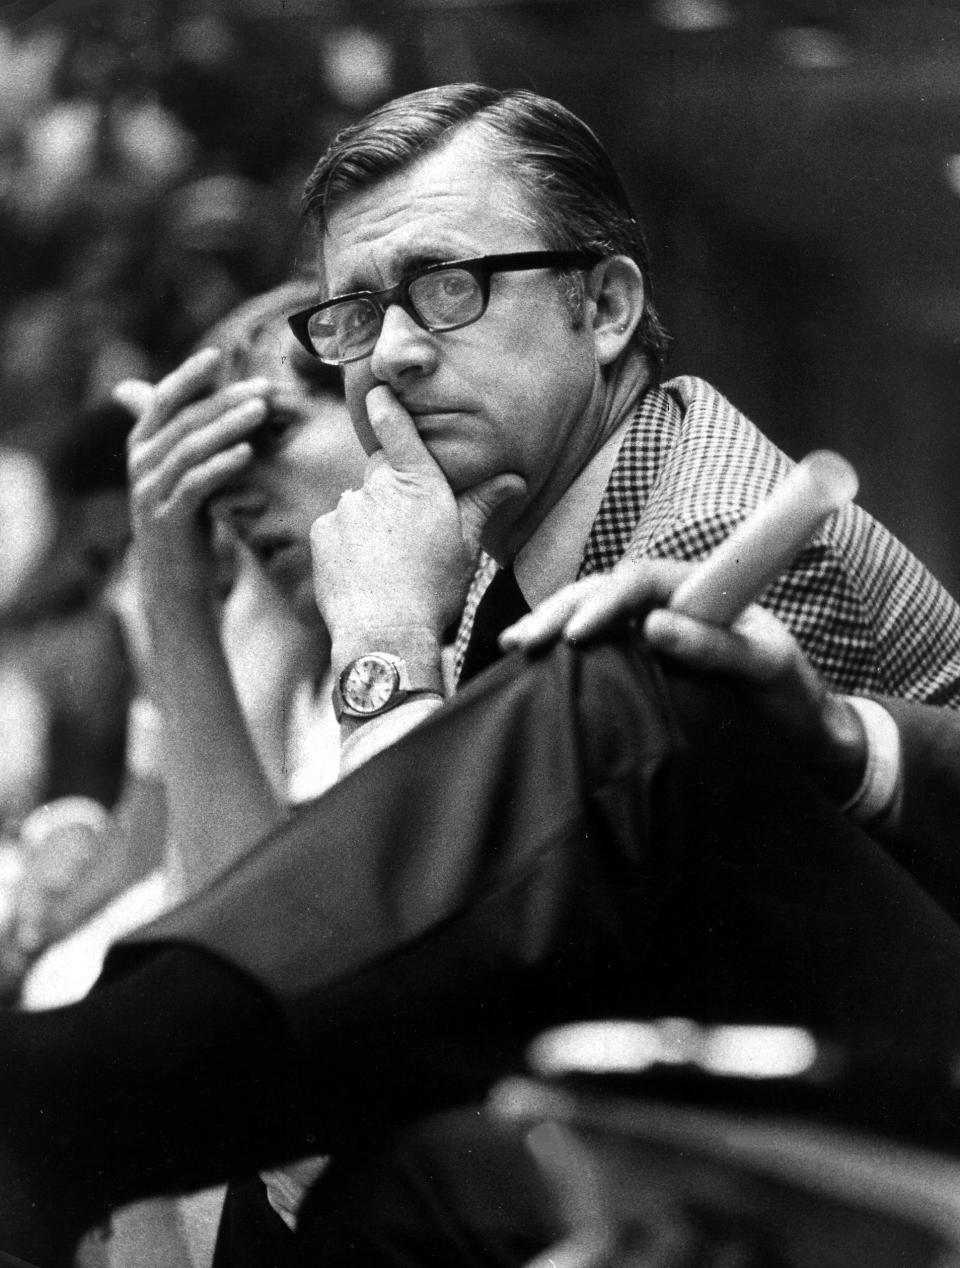 Memphis State University head basketball coach Gene Bartow was a picture of concentration as he watched the Tigers manhandle North Texas State 91 to 60 in the Missouri Valley Conference television game-of-the-week on January 22, 1972.